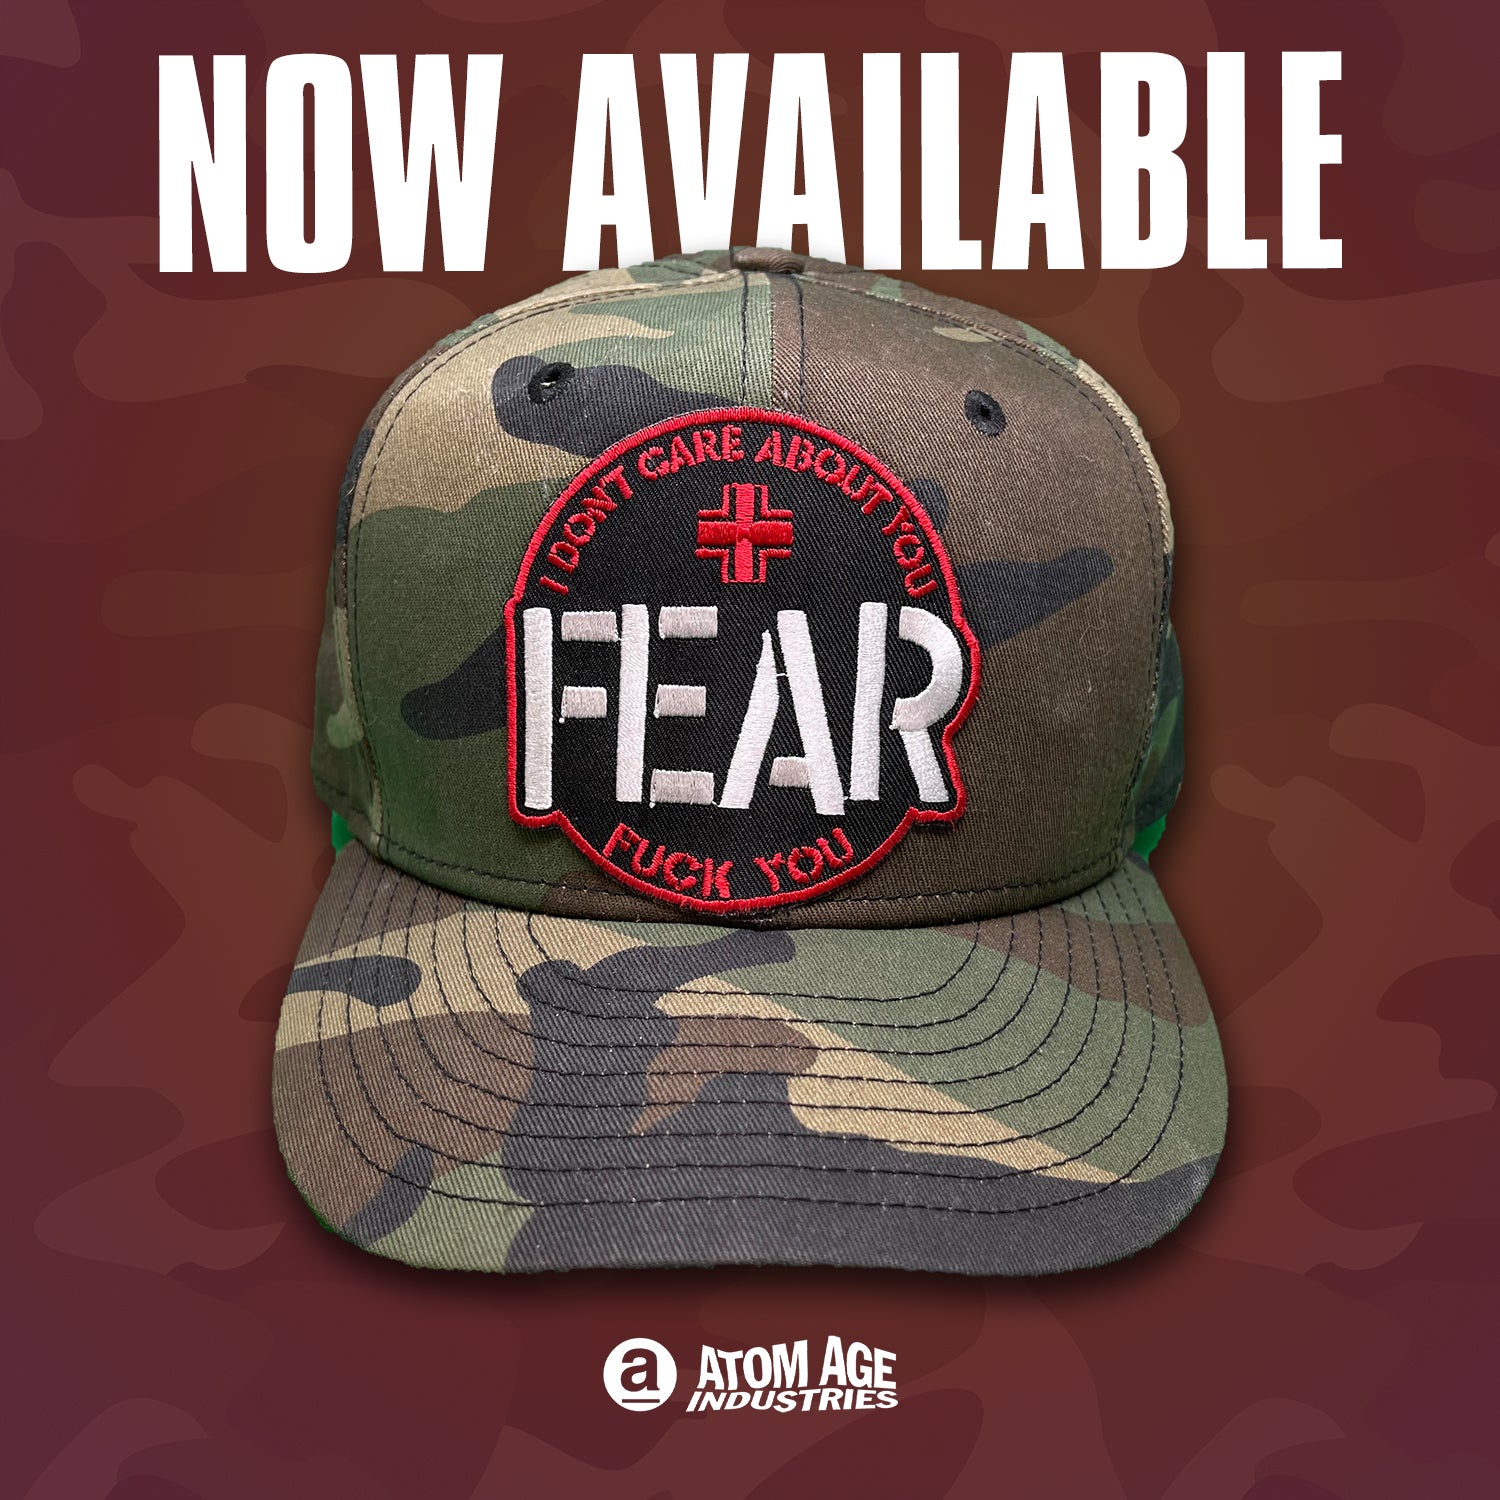 FEAR: "I DON'T CARE ABOUT YOU" CAMO STYLE EMBROIDERED BALLCAP